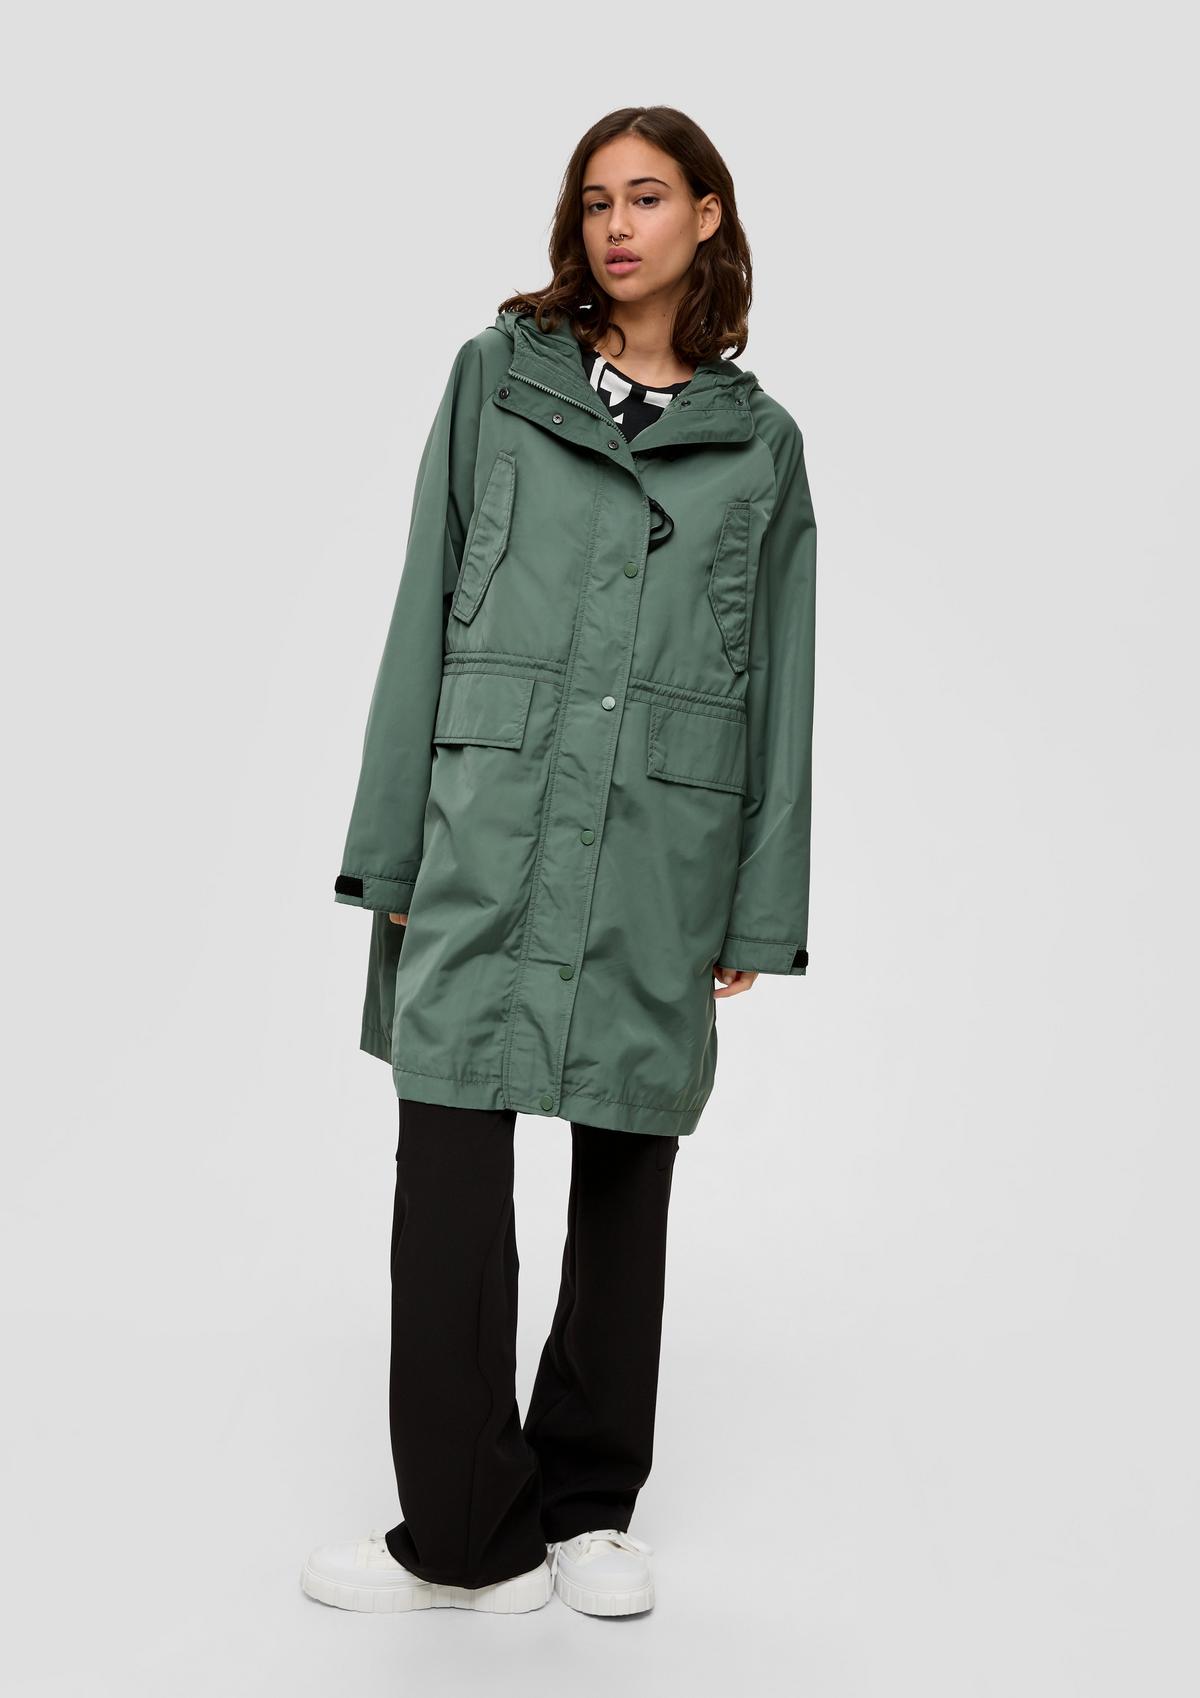 Outerwear mantel in oversized fit